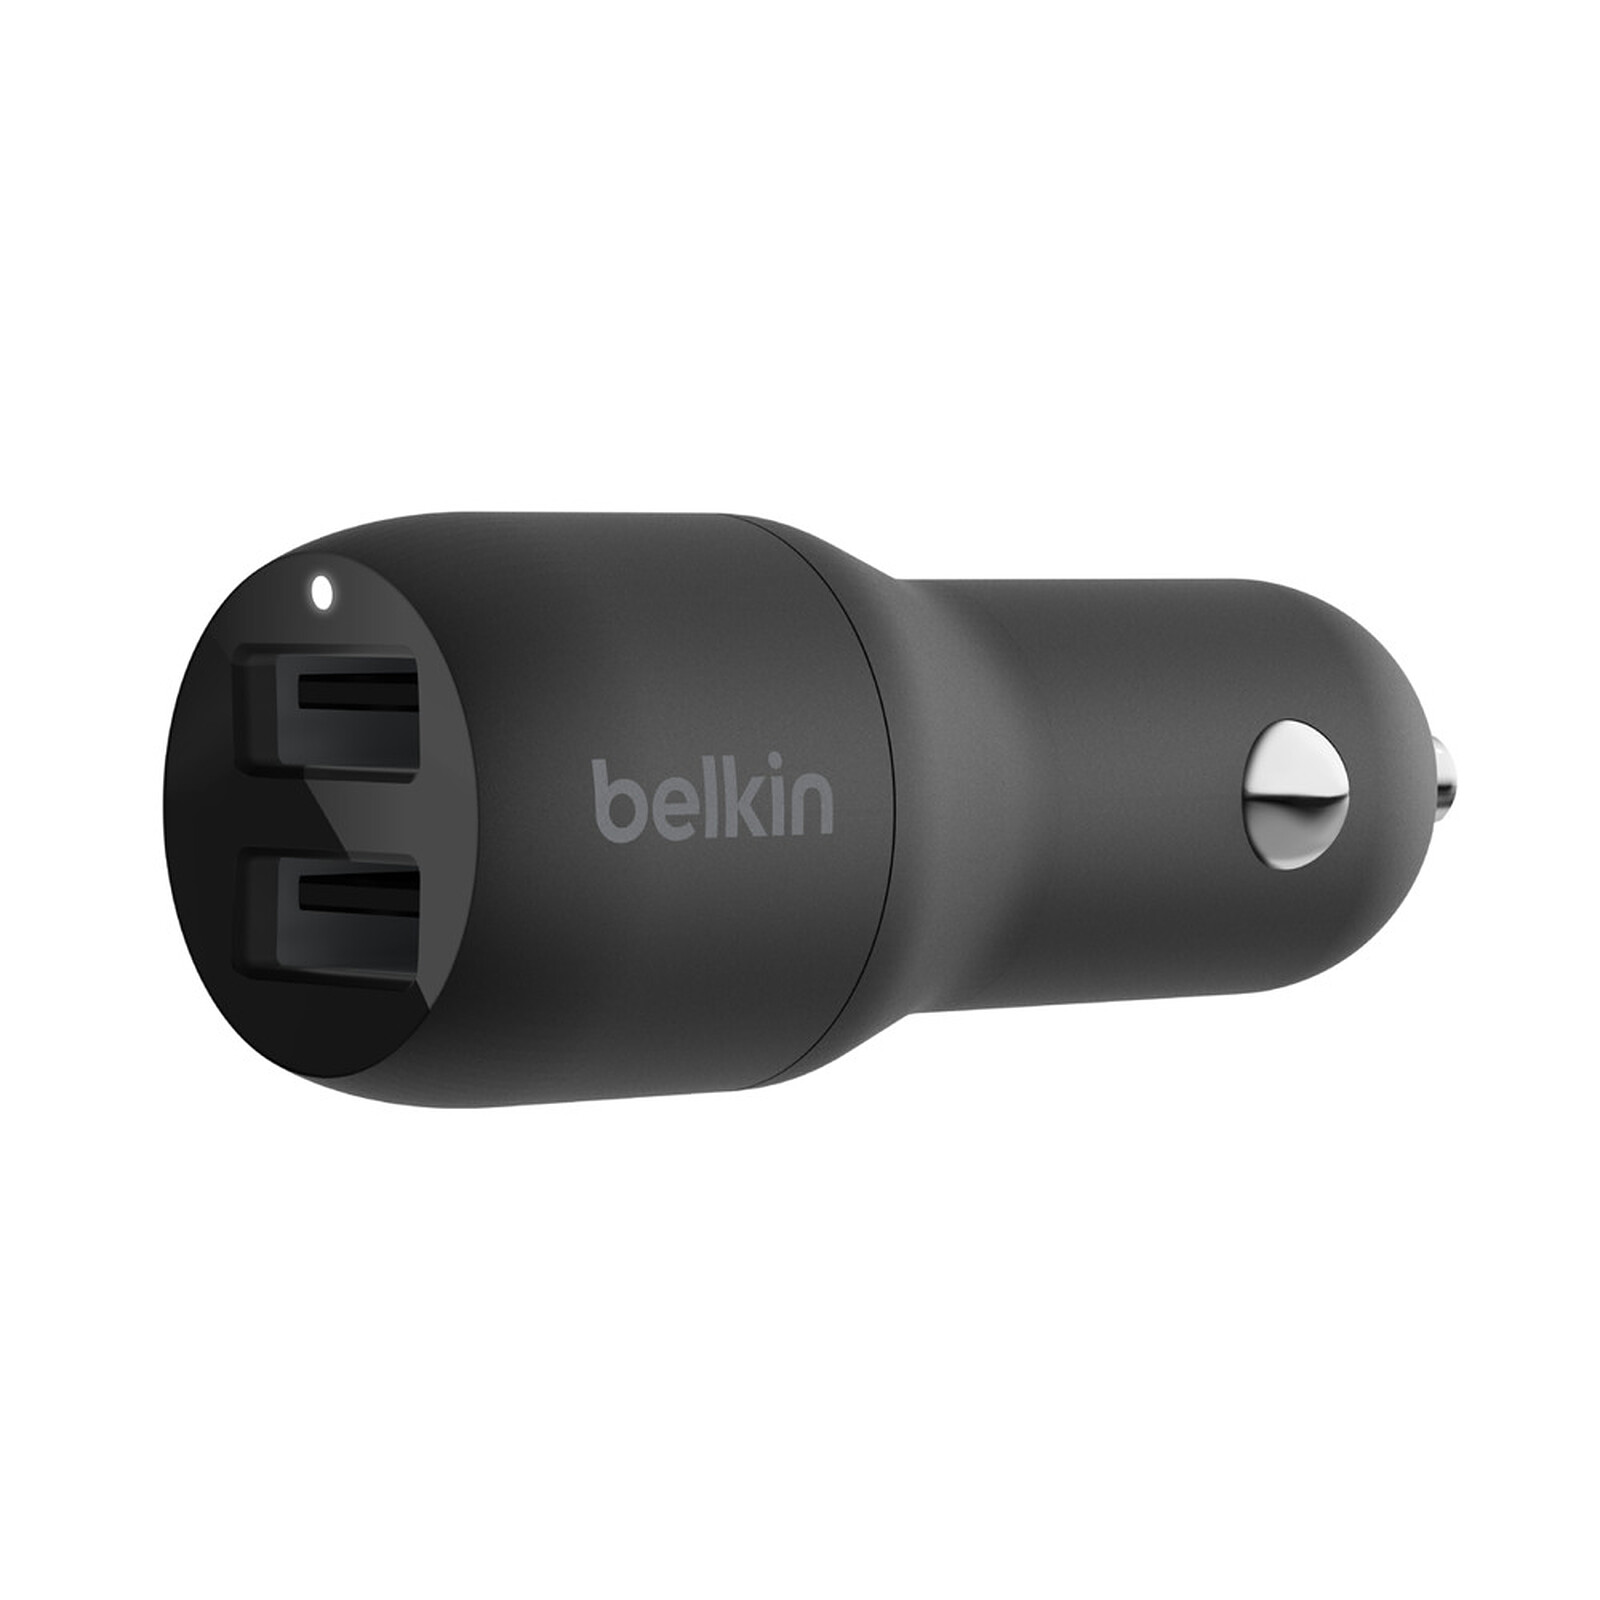 Belkin Boost Charger 2-Port USB-A Car Charger (24W) to Cigarette Lighter  (Black) - Cigarette lighter charger - LDLC 3-year warranty